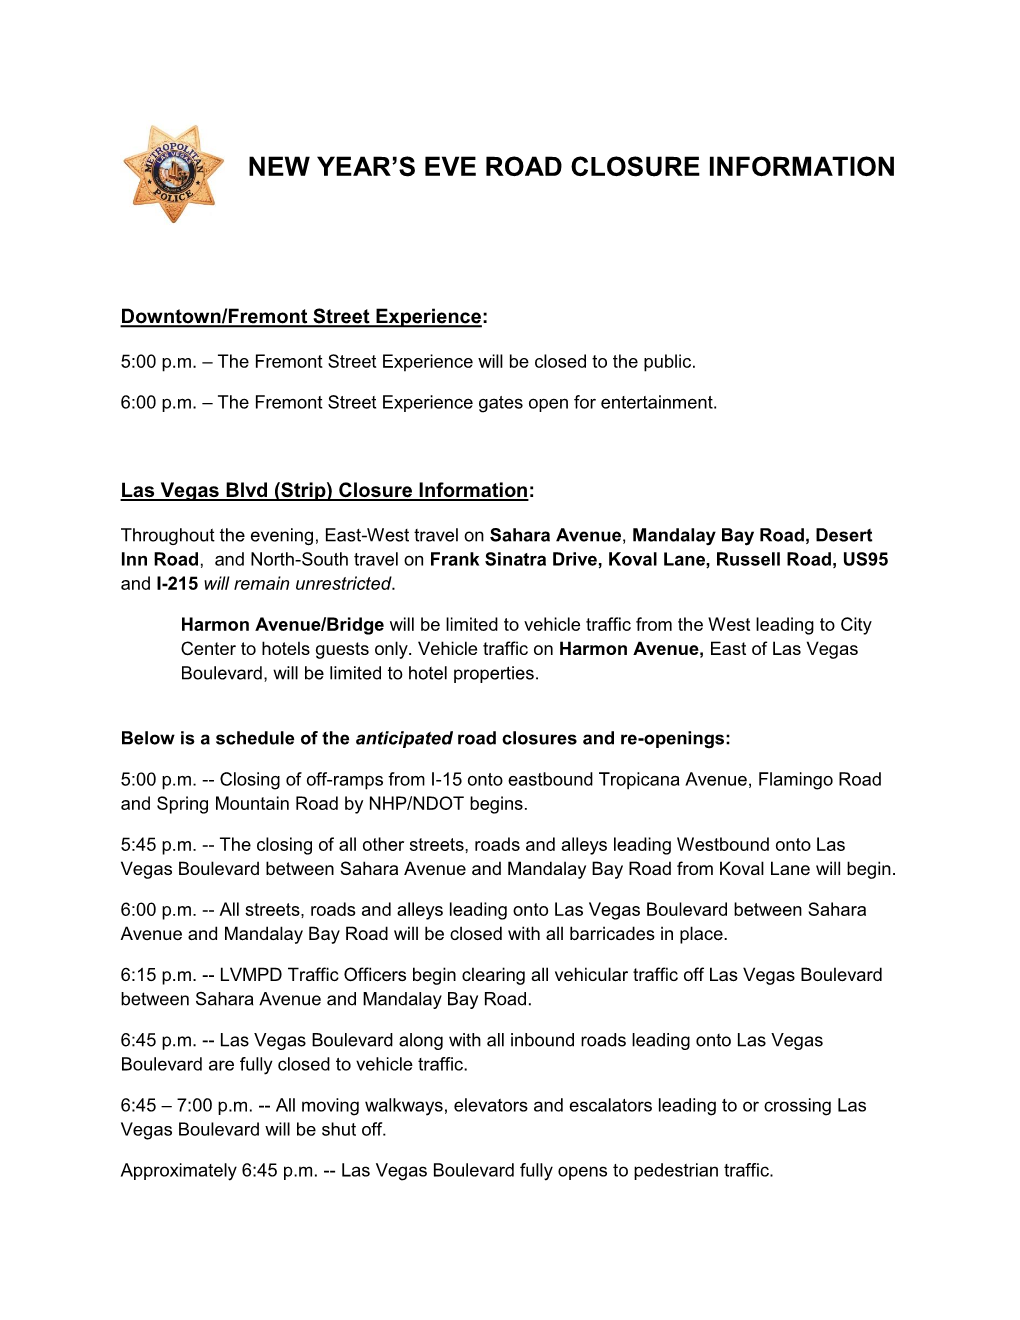 New Year's Eve Road Closure Information